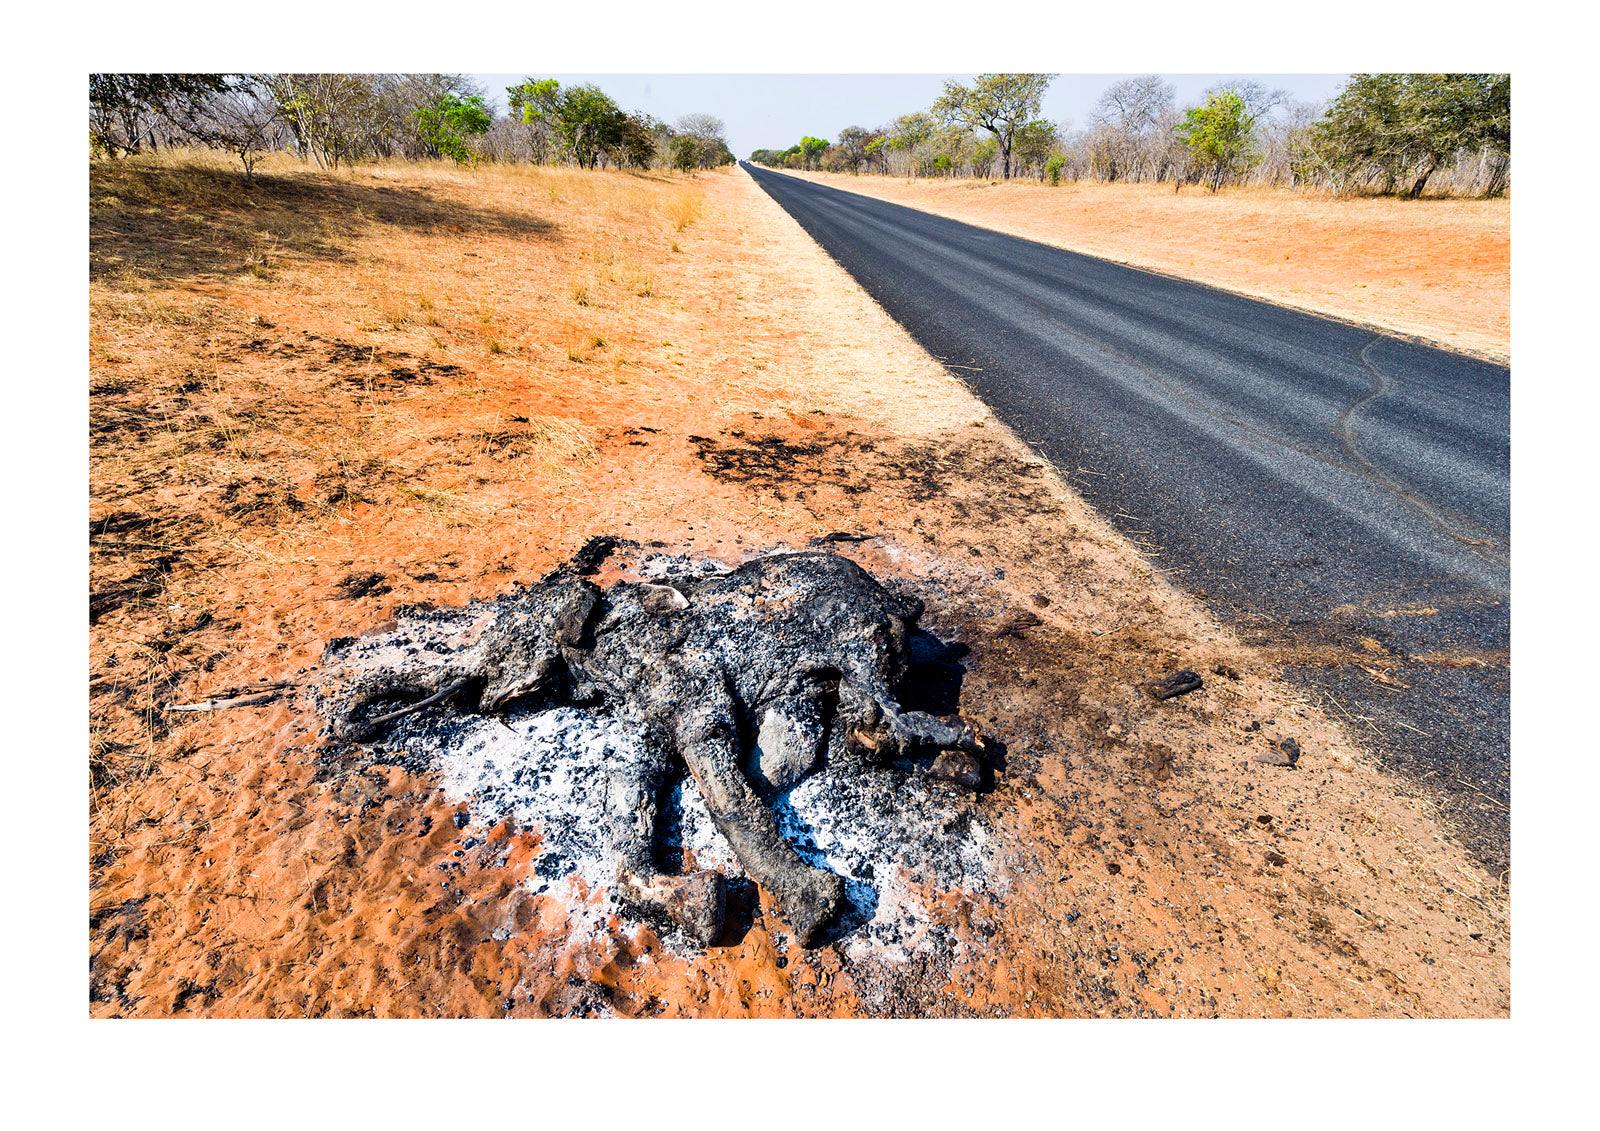 The charred remains of an African elephant slaughtered by poachers for bush meat and burned by National Park rangers to prevent the spread of Anthrax. Chobe National Park, Botswana, Africa.